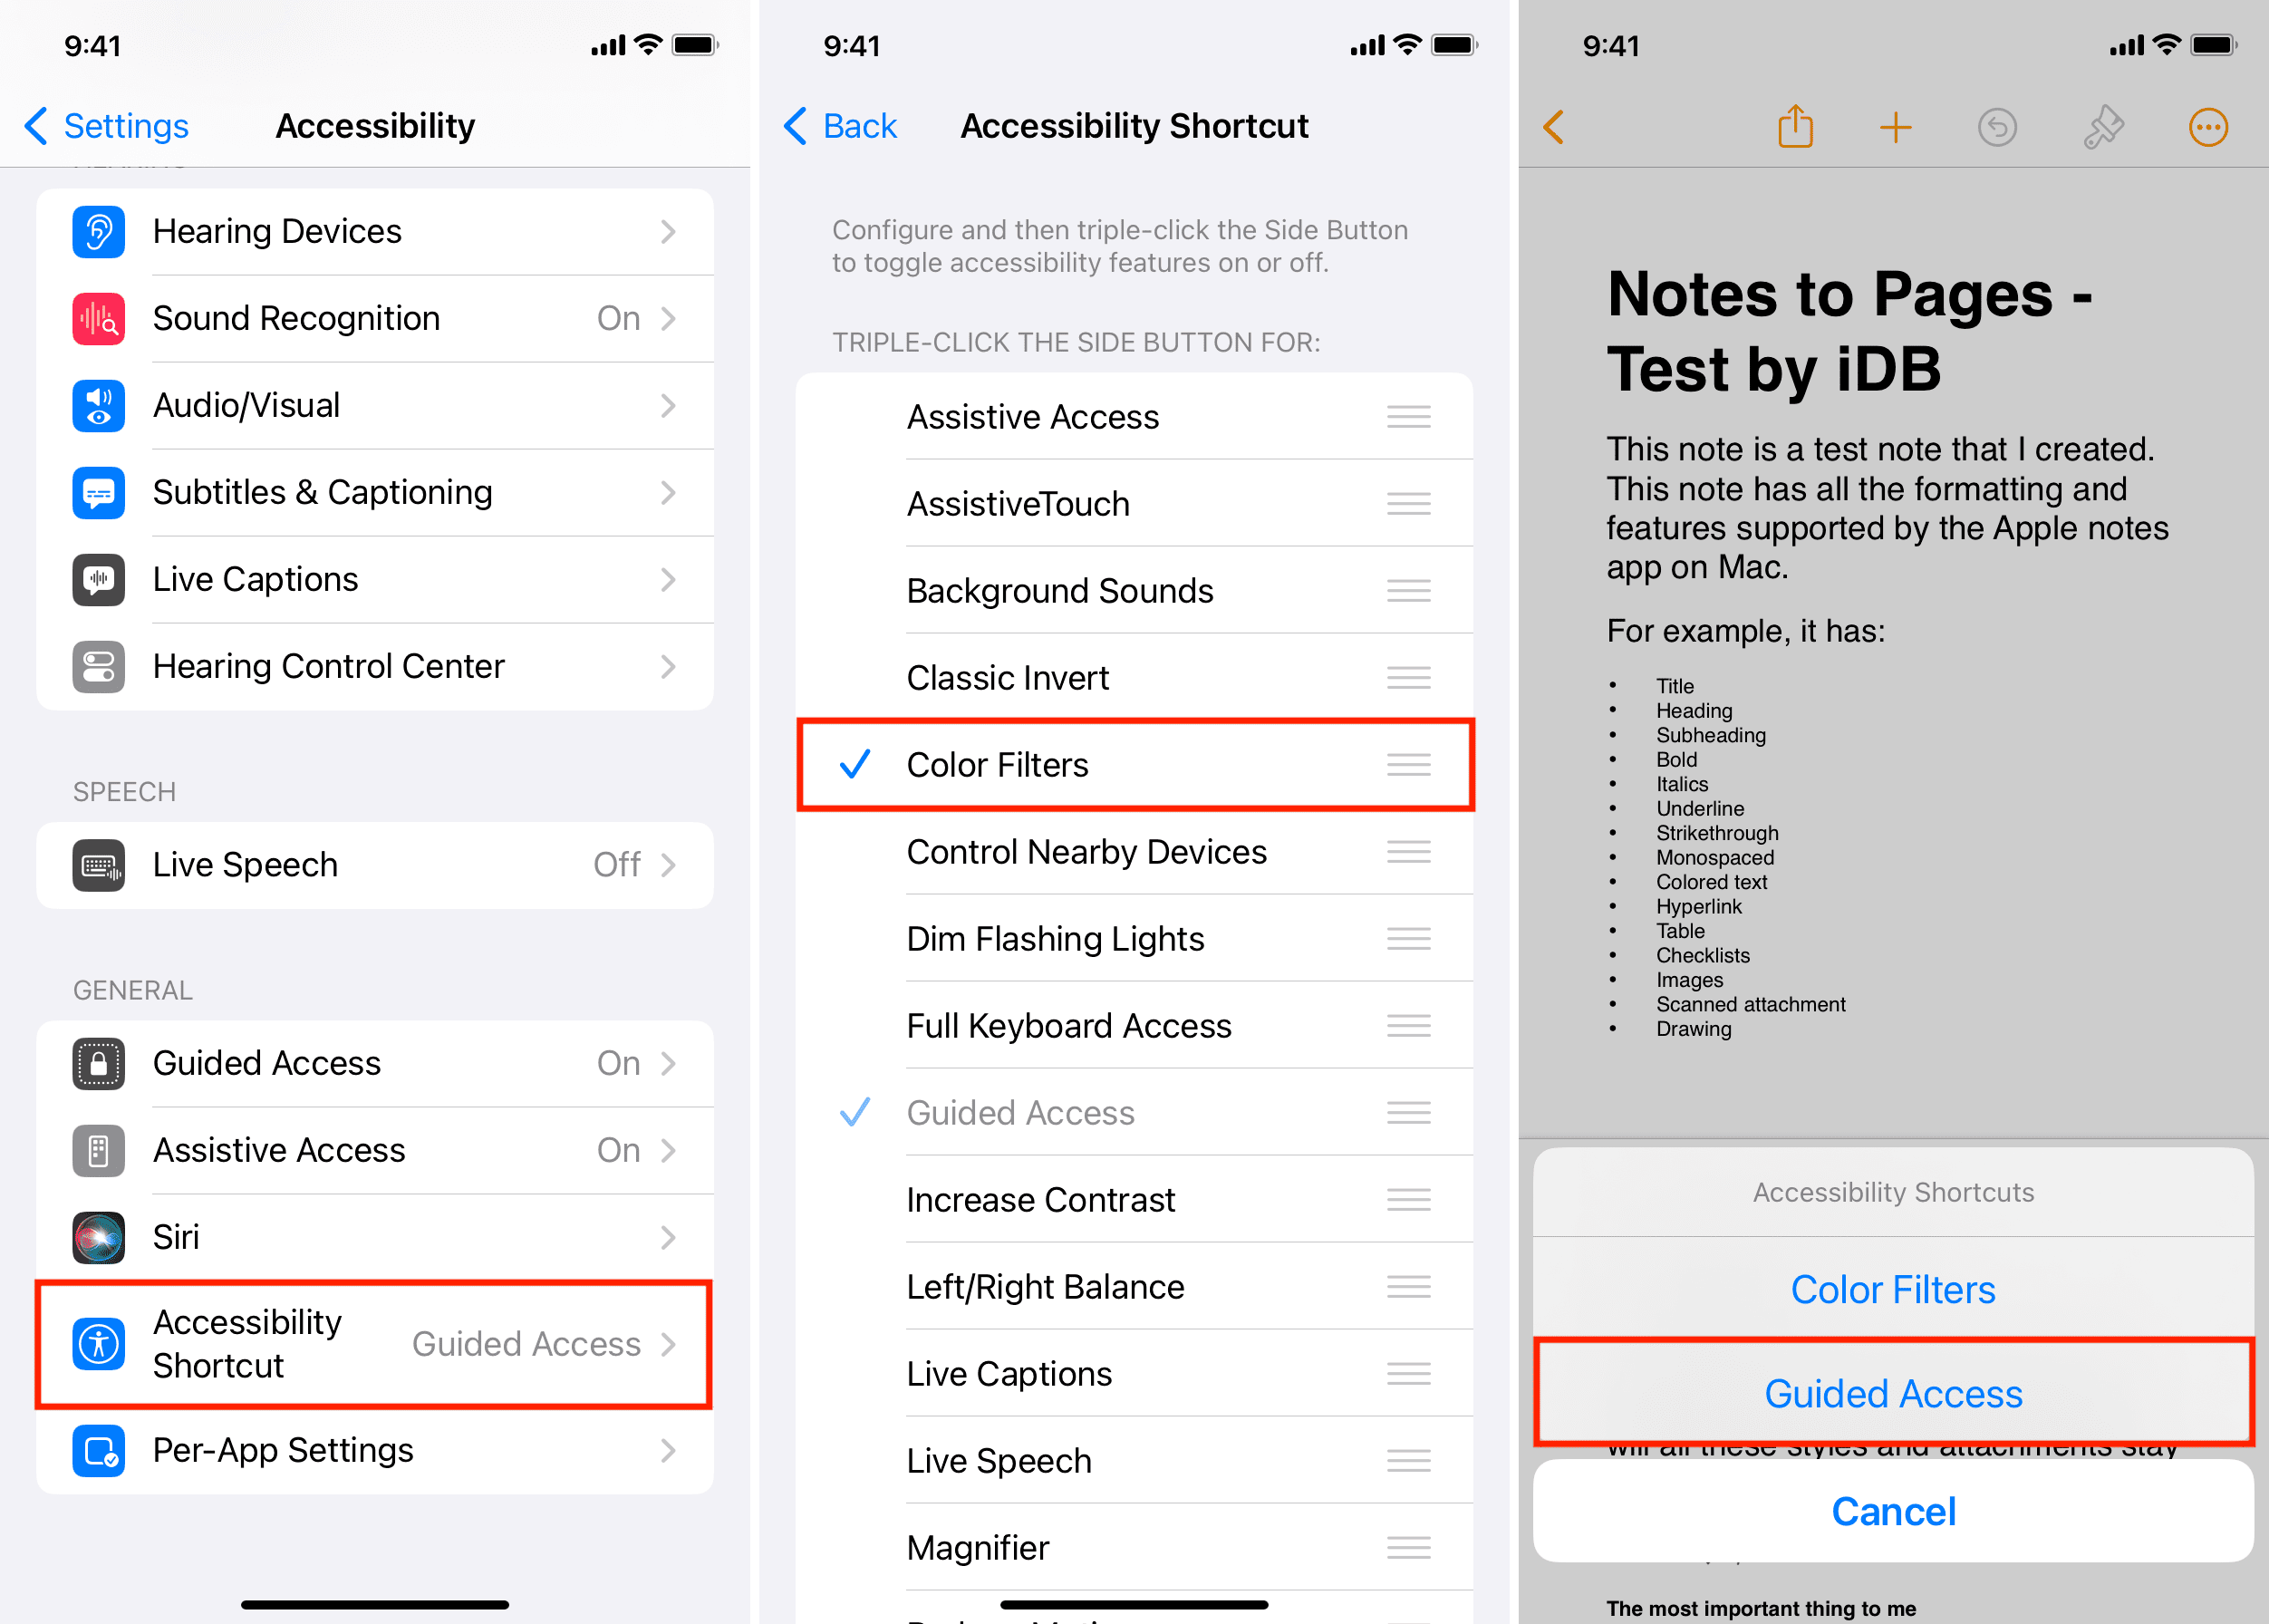 Accessibility Shortcut set to Guided Access and Color Filters on iPhone